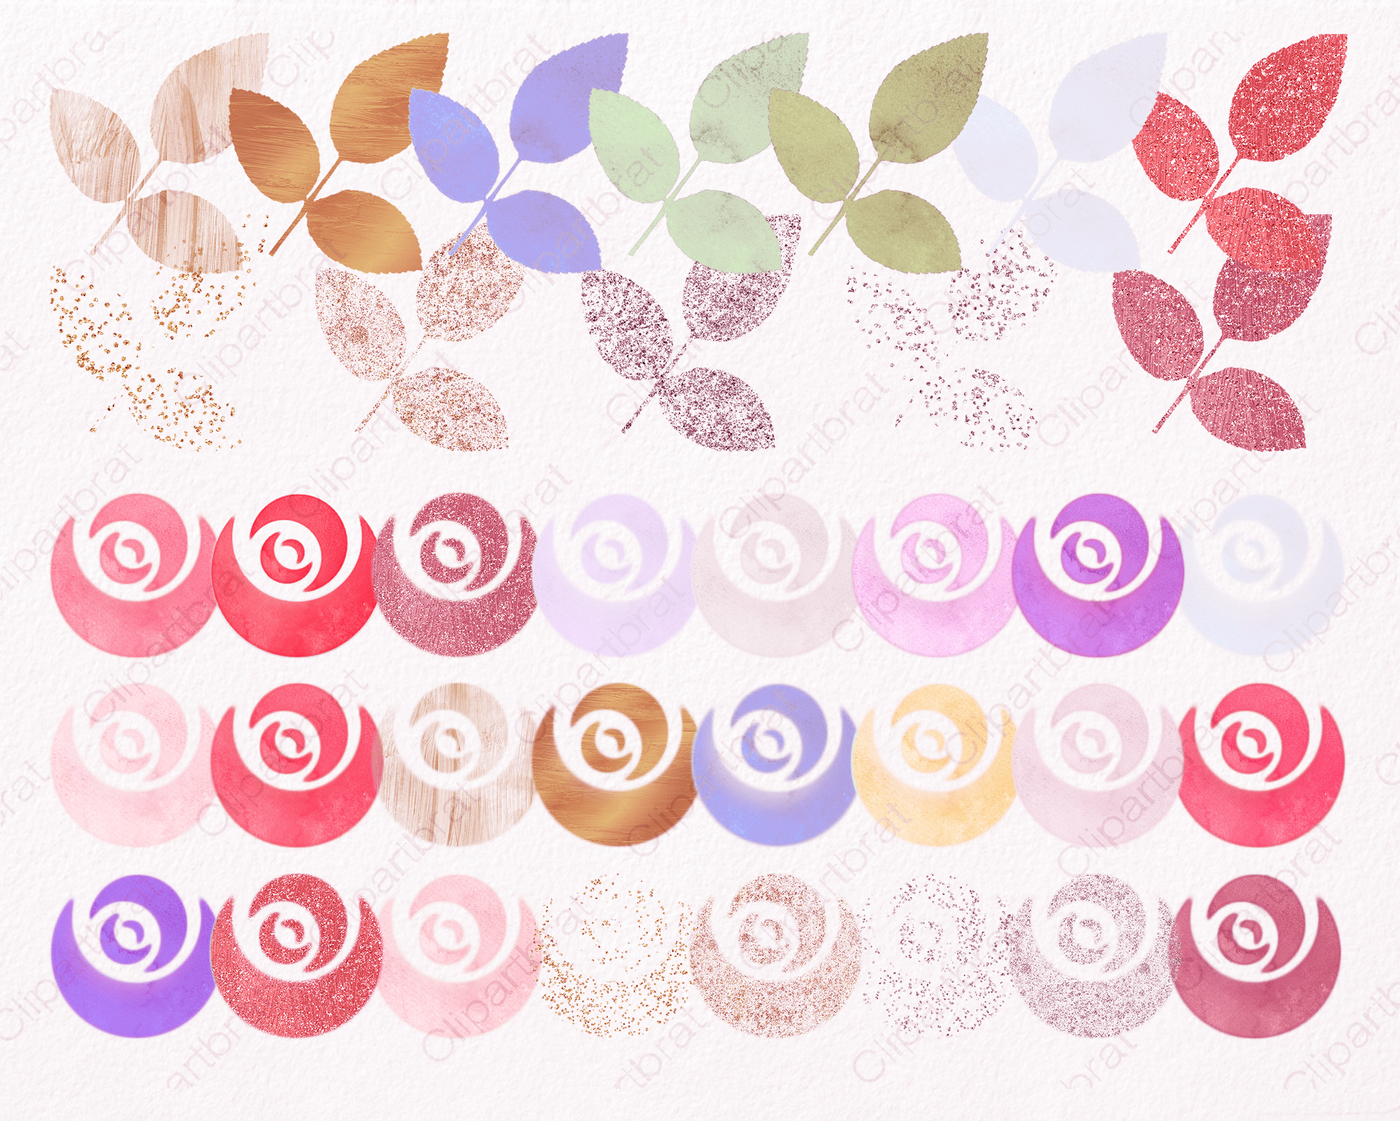 Download Blush Pink & Rose Gold Roses Watercolor Floral Graphics By ...